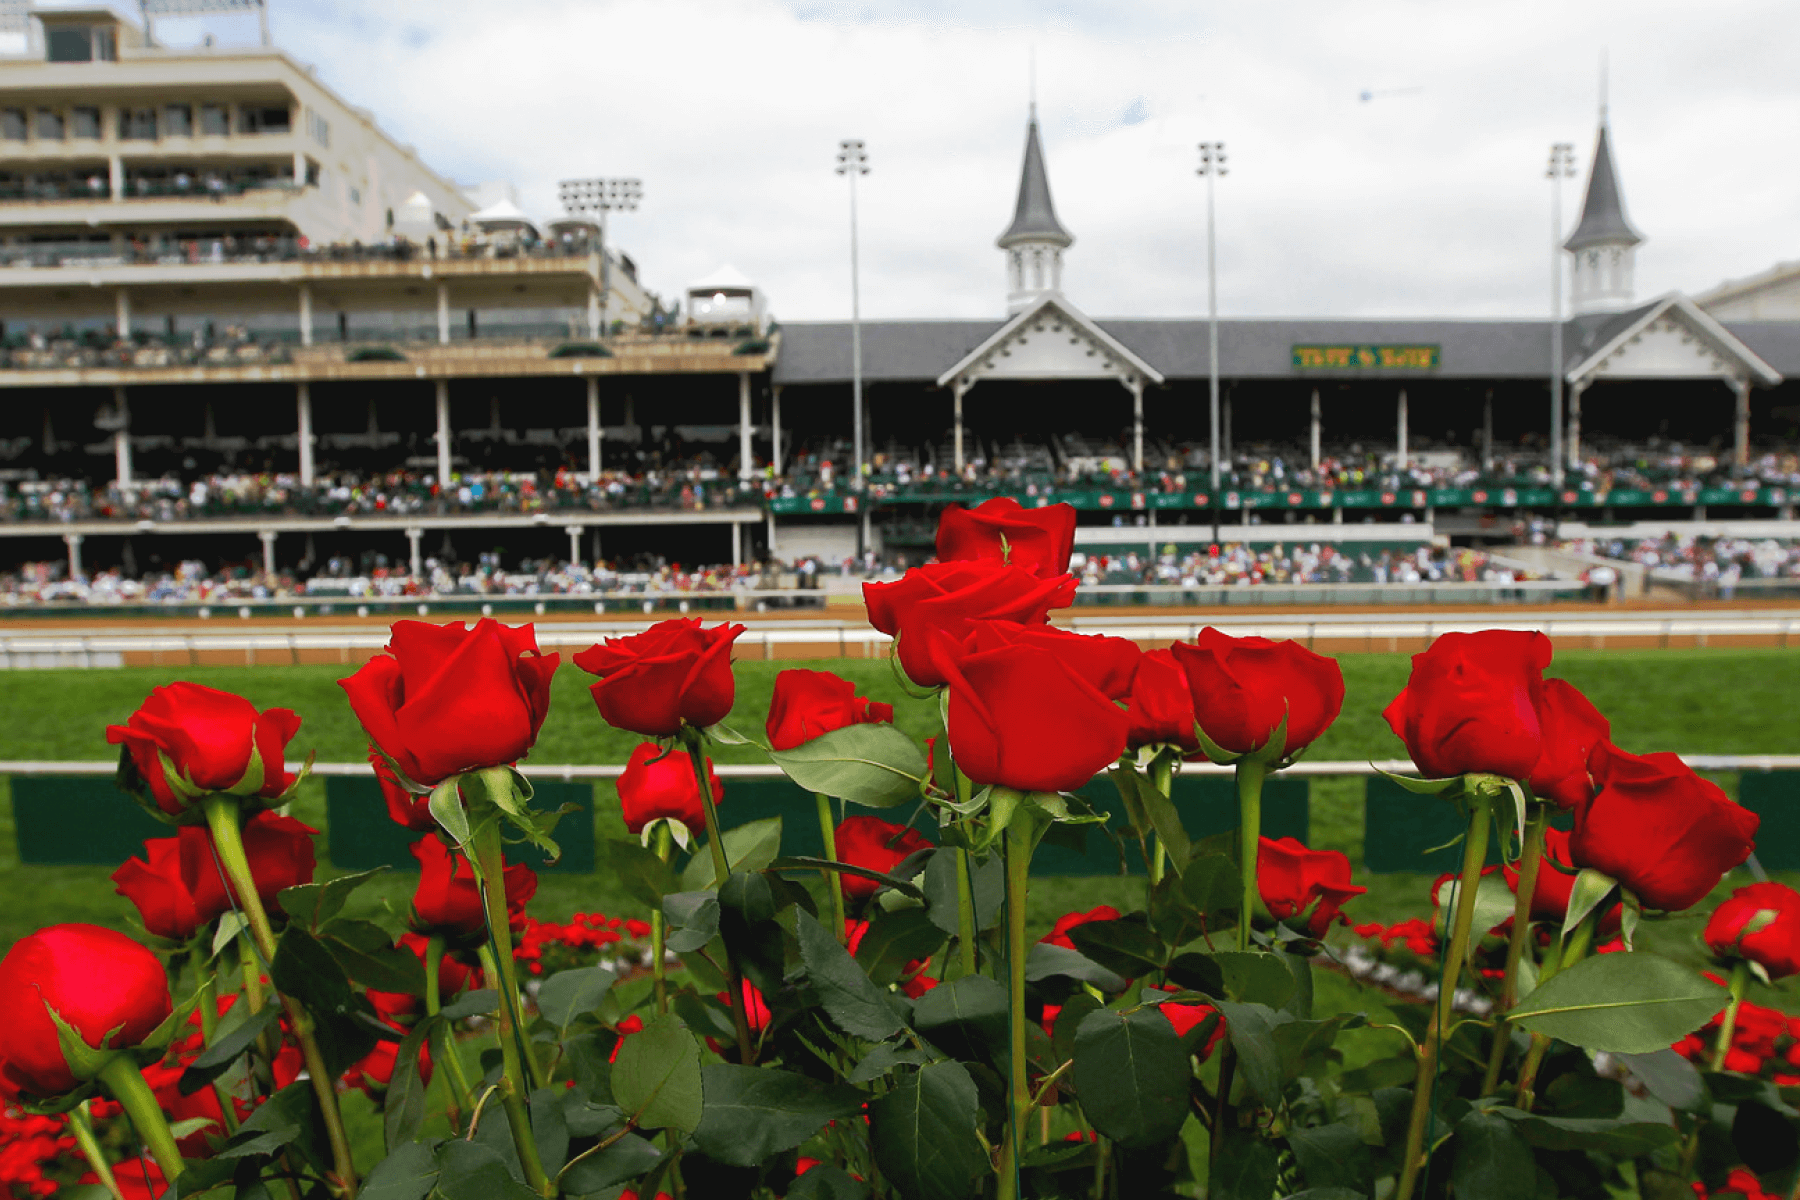 A view of Churchill Downs racetrack with many red long stem roses in the foreground.